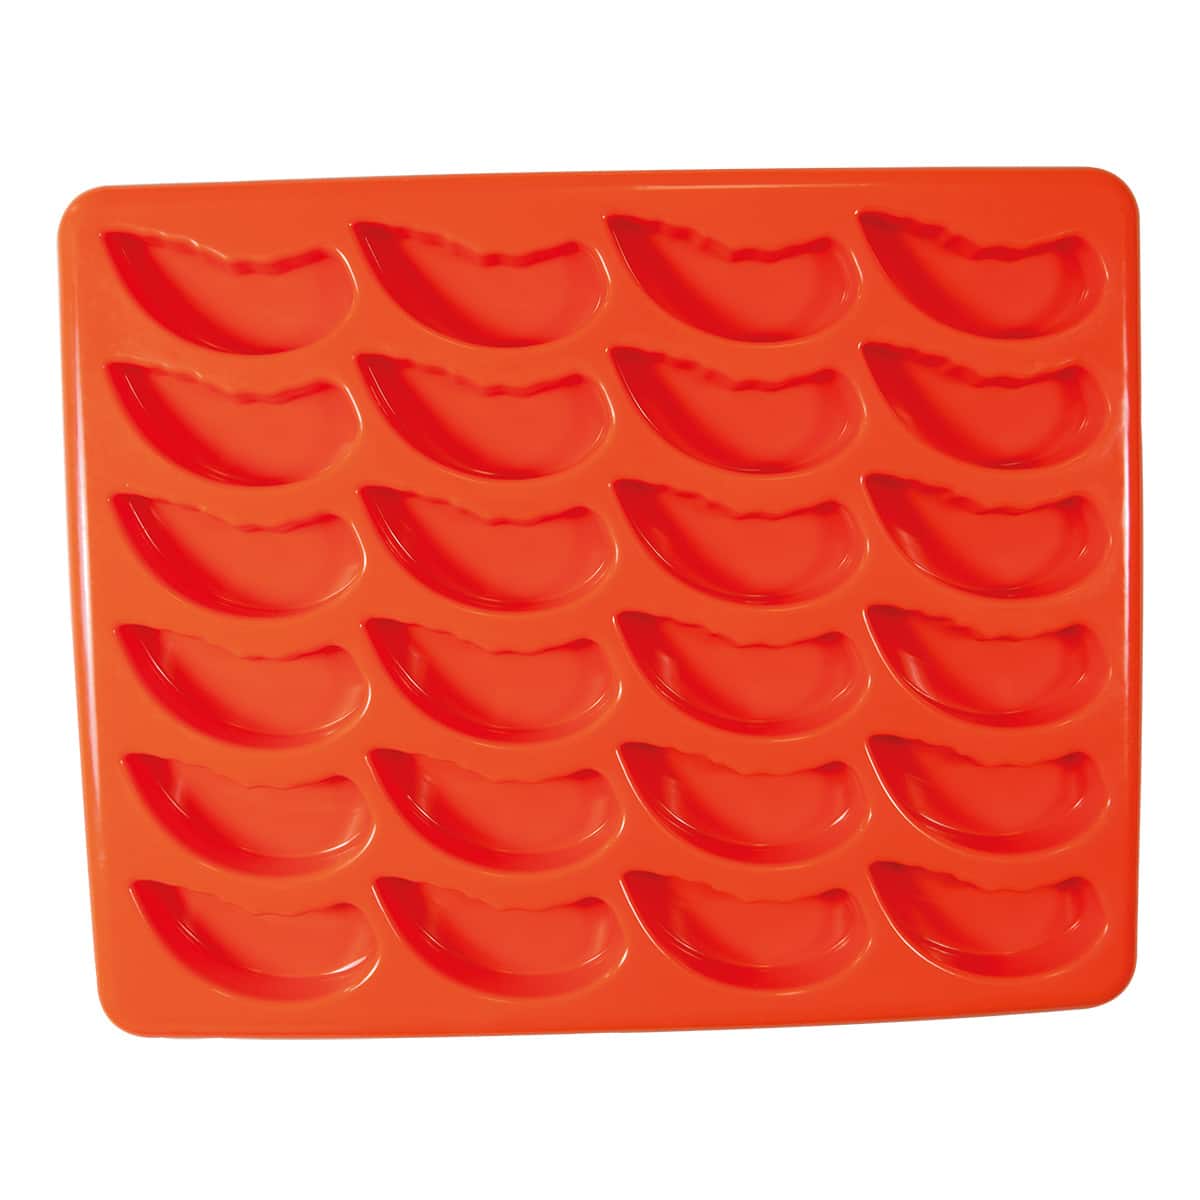 Flavour Creations Sliced Fruit Food Mould (20ml)